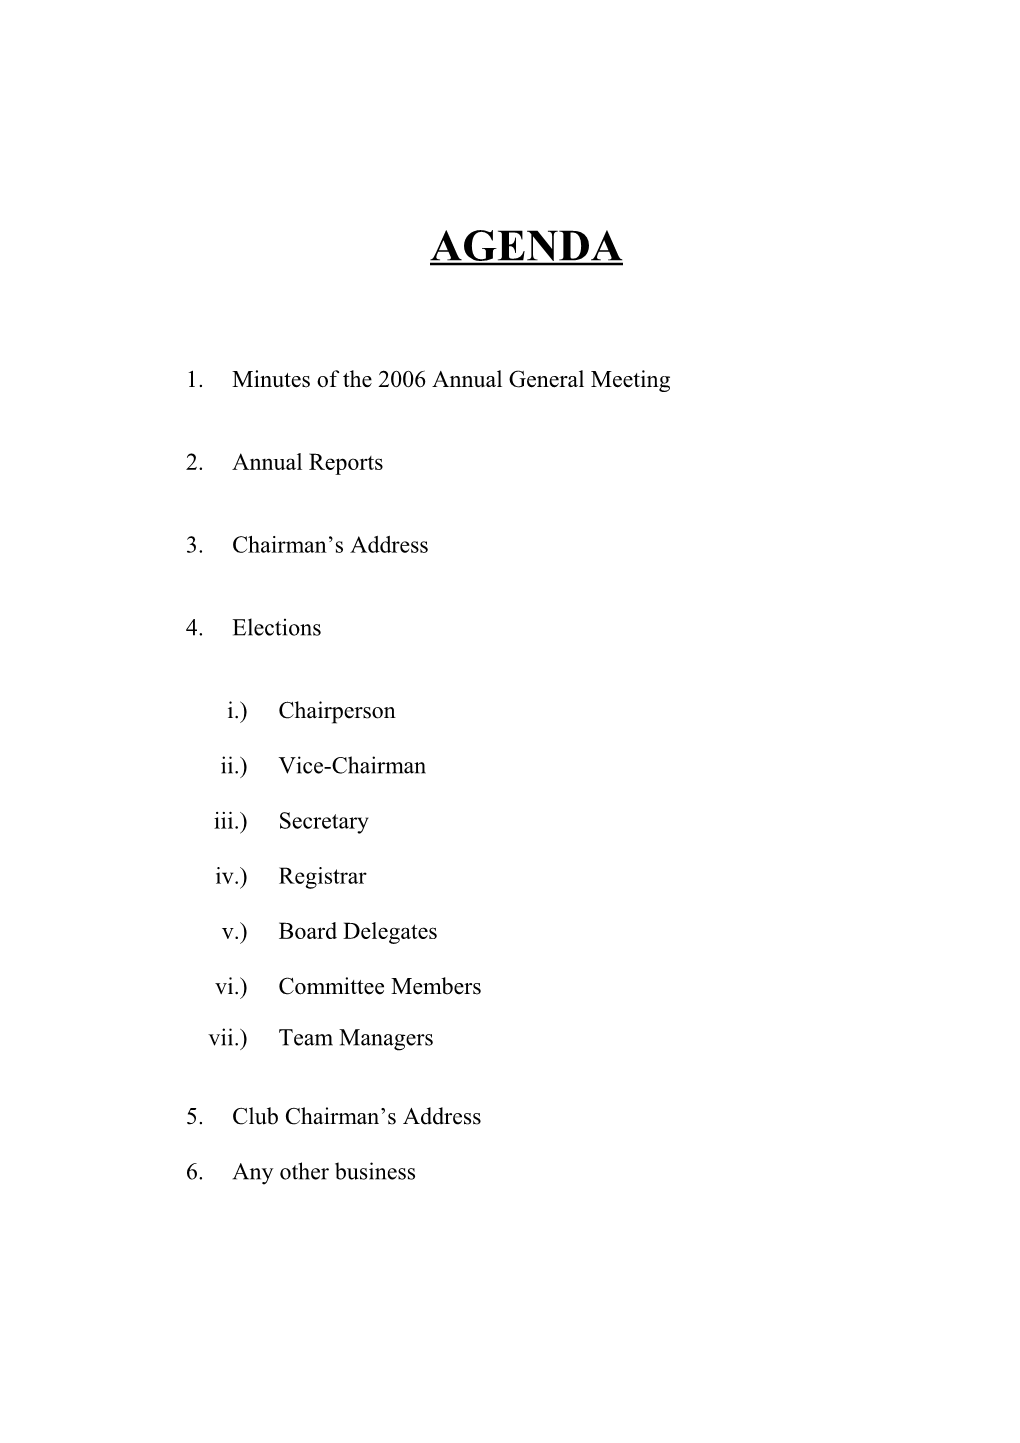 Minutes of the 2006 Annual General Meeting